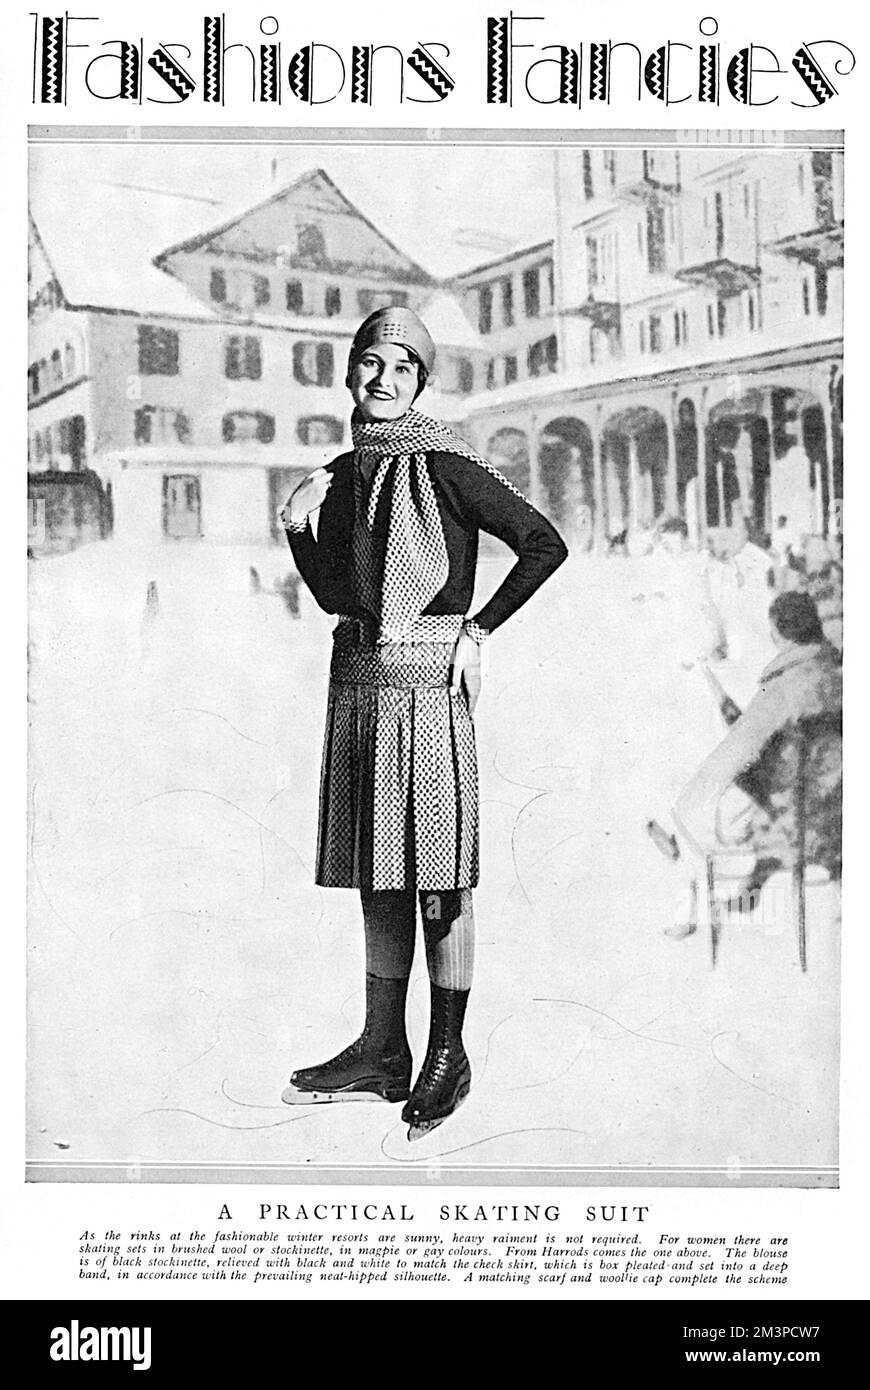 A practical skating suit for wearing to the rinks of fashionable winter resorts.  The blouse is of black stockinette, relieved with black and white to match the check skirt, which is box pleated and set into a deep band, 'in accordance with the prevealing neat-hipped silhouette.'  A matching scarf and woollie cap complete the scheme.  1929 Stock Photo